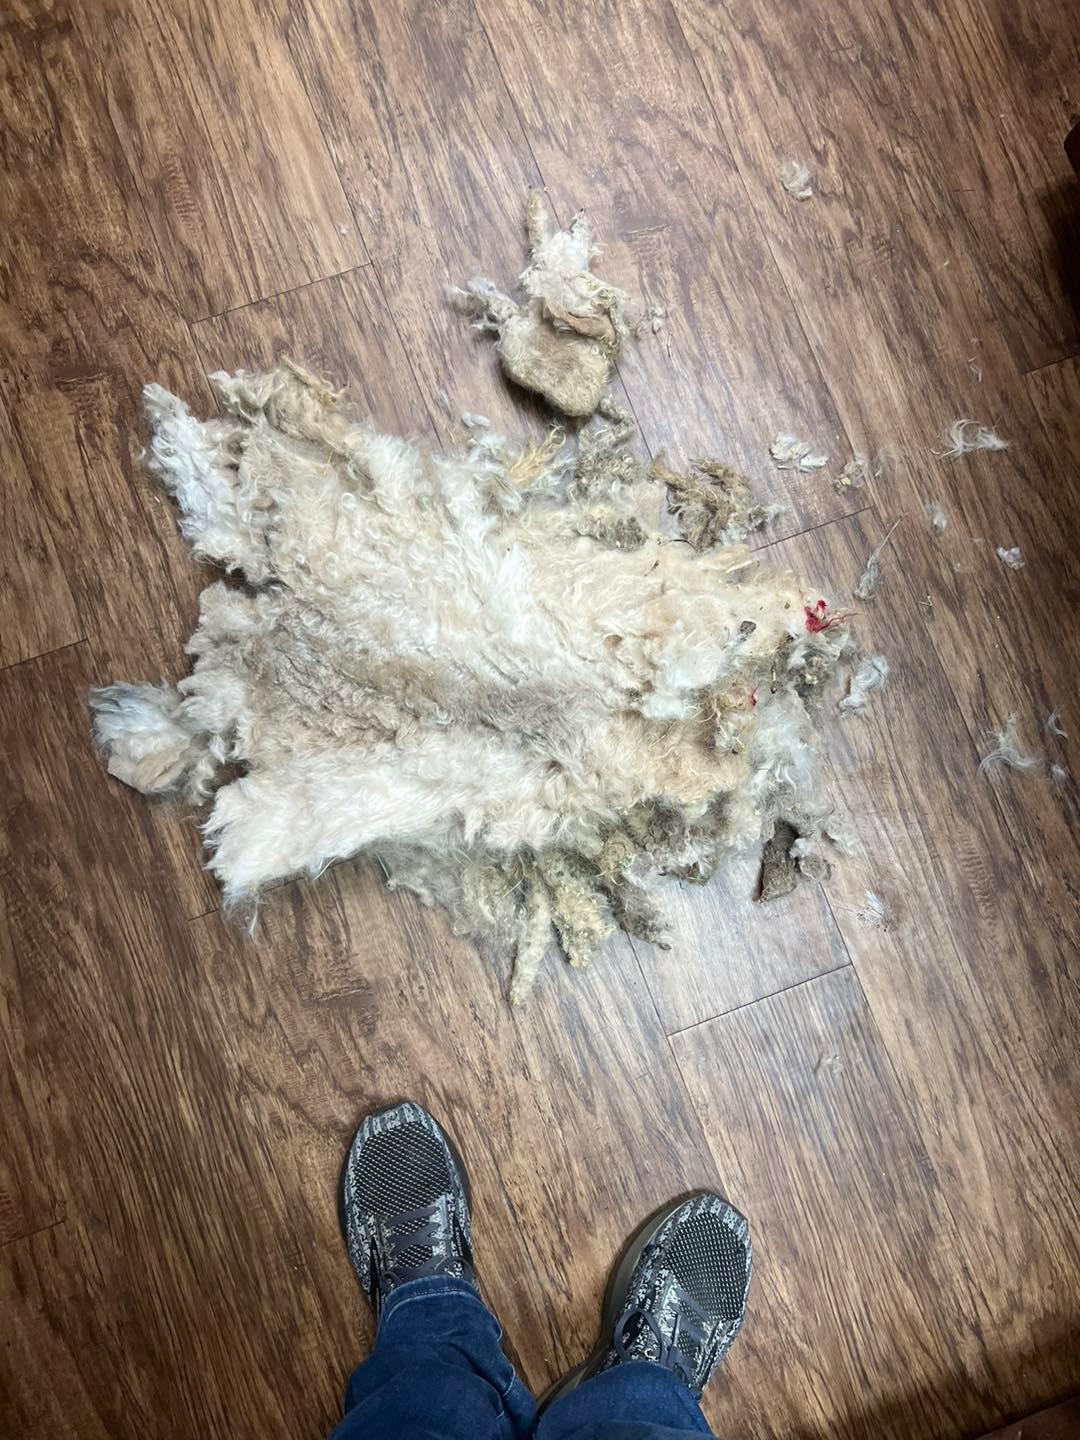 Matt lost 3 pounds of fur. (Courtesy of Tori Houston and South Plains SPCA)